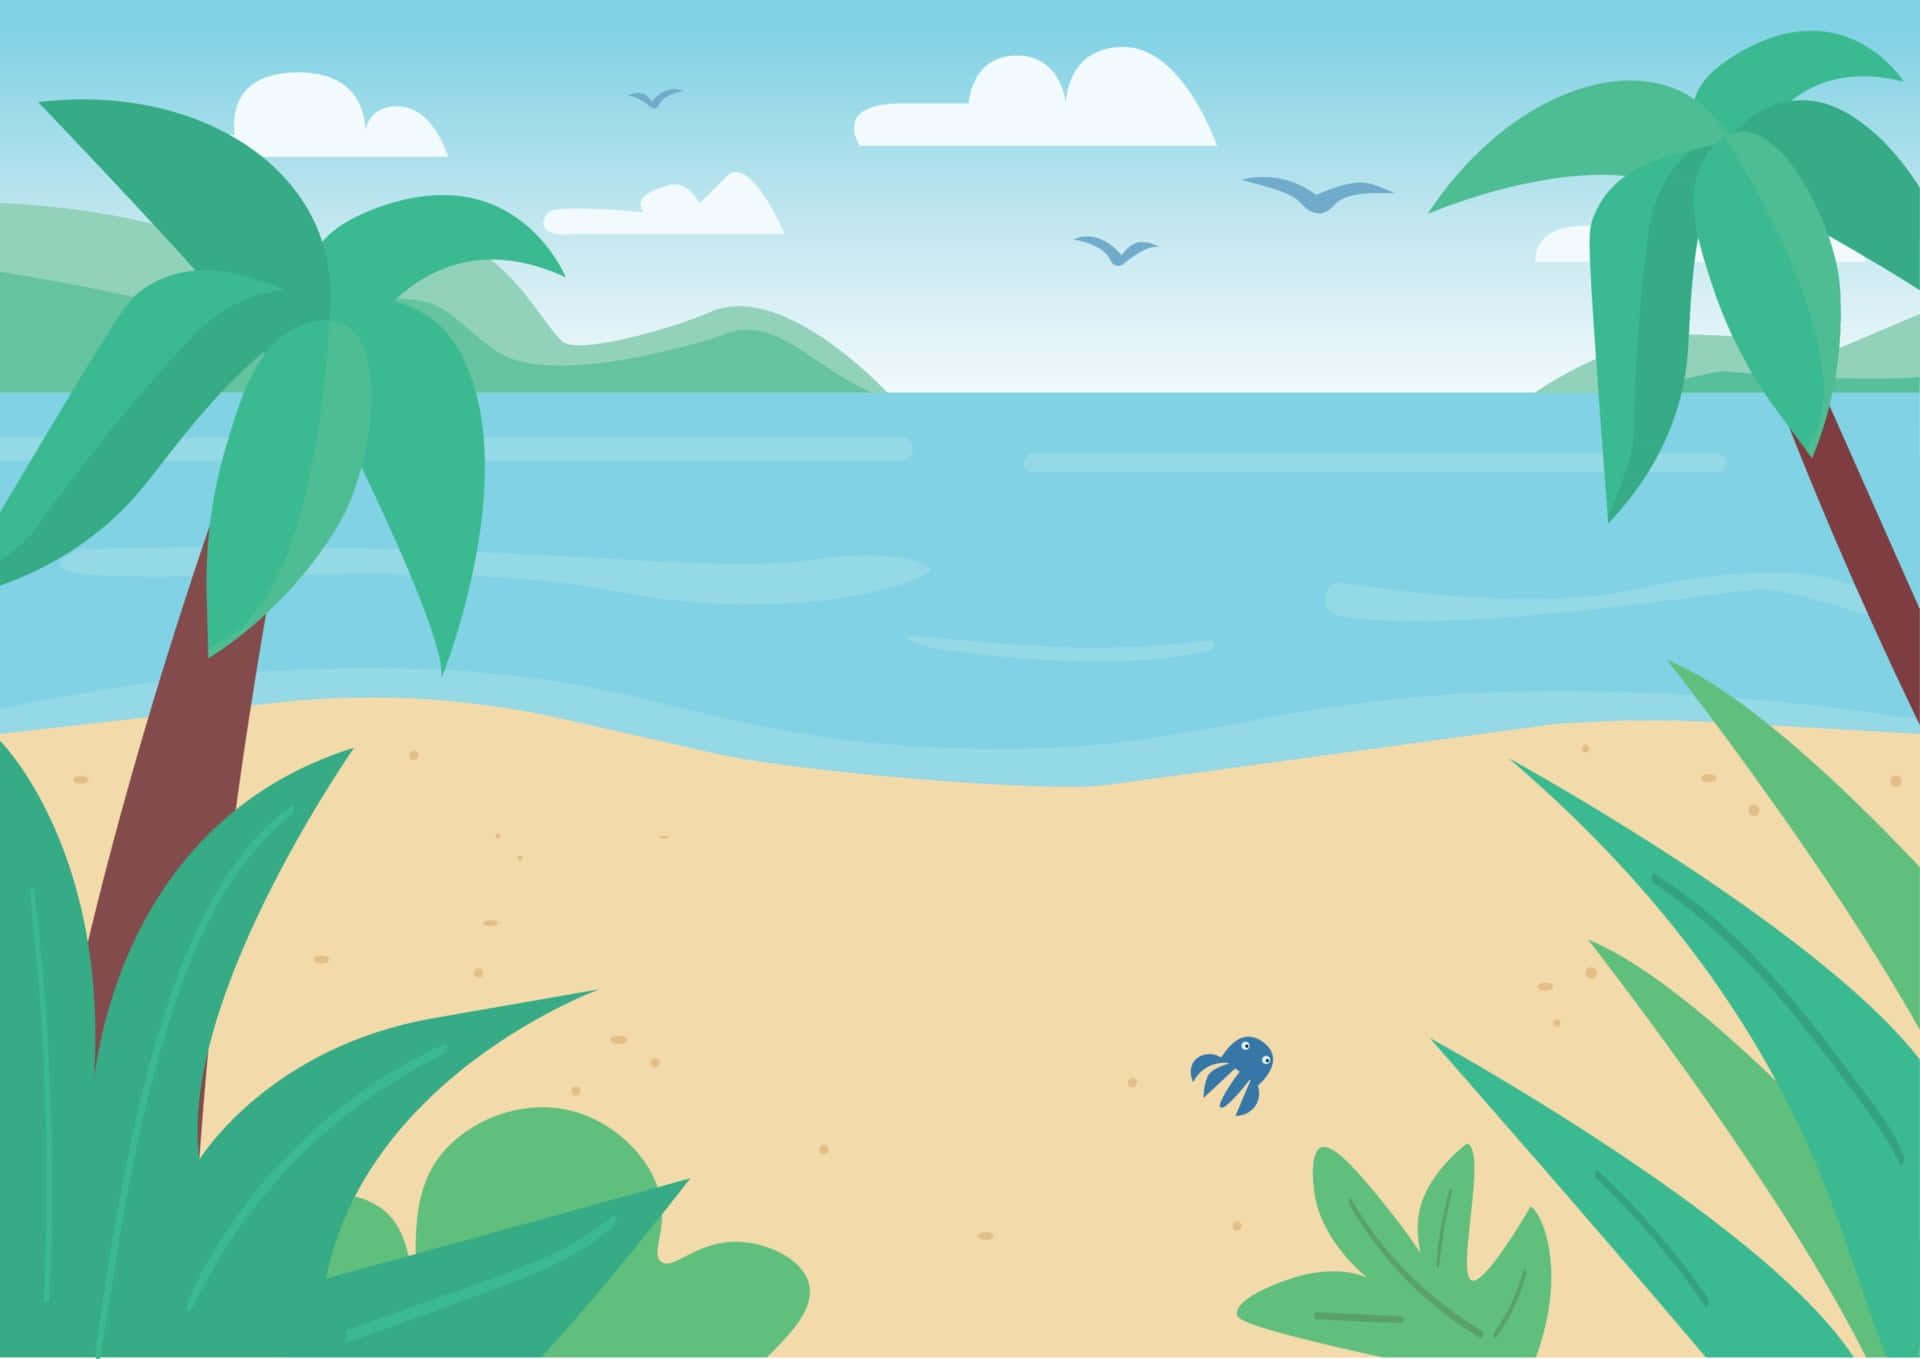 A Cartoon Illustration Of A Beach Scene With Palm Trees And Sea